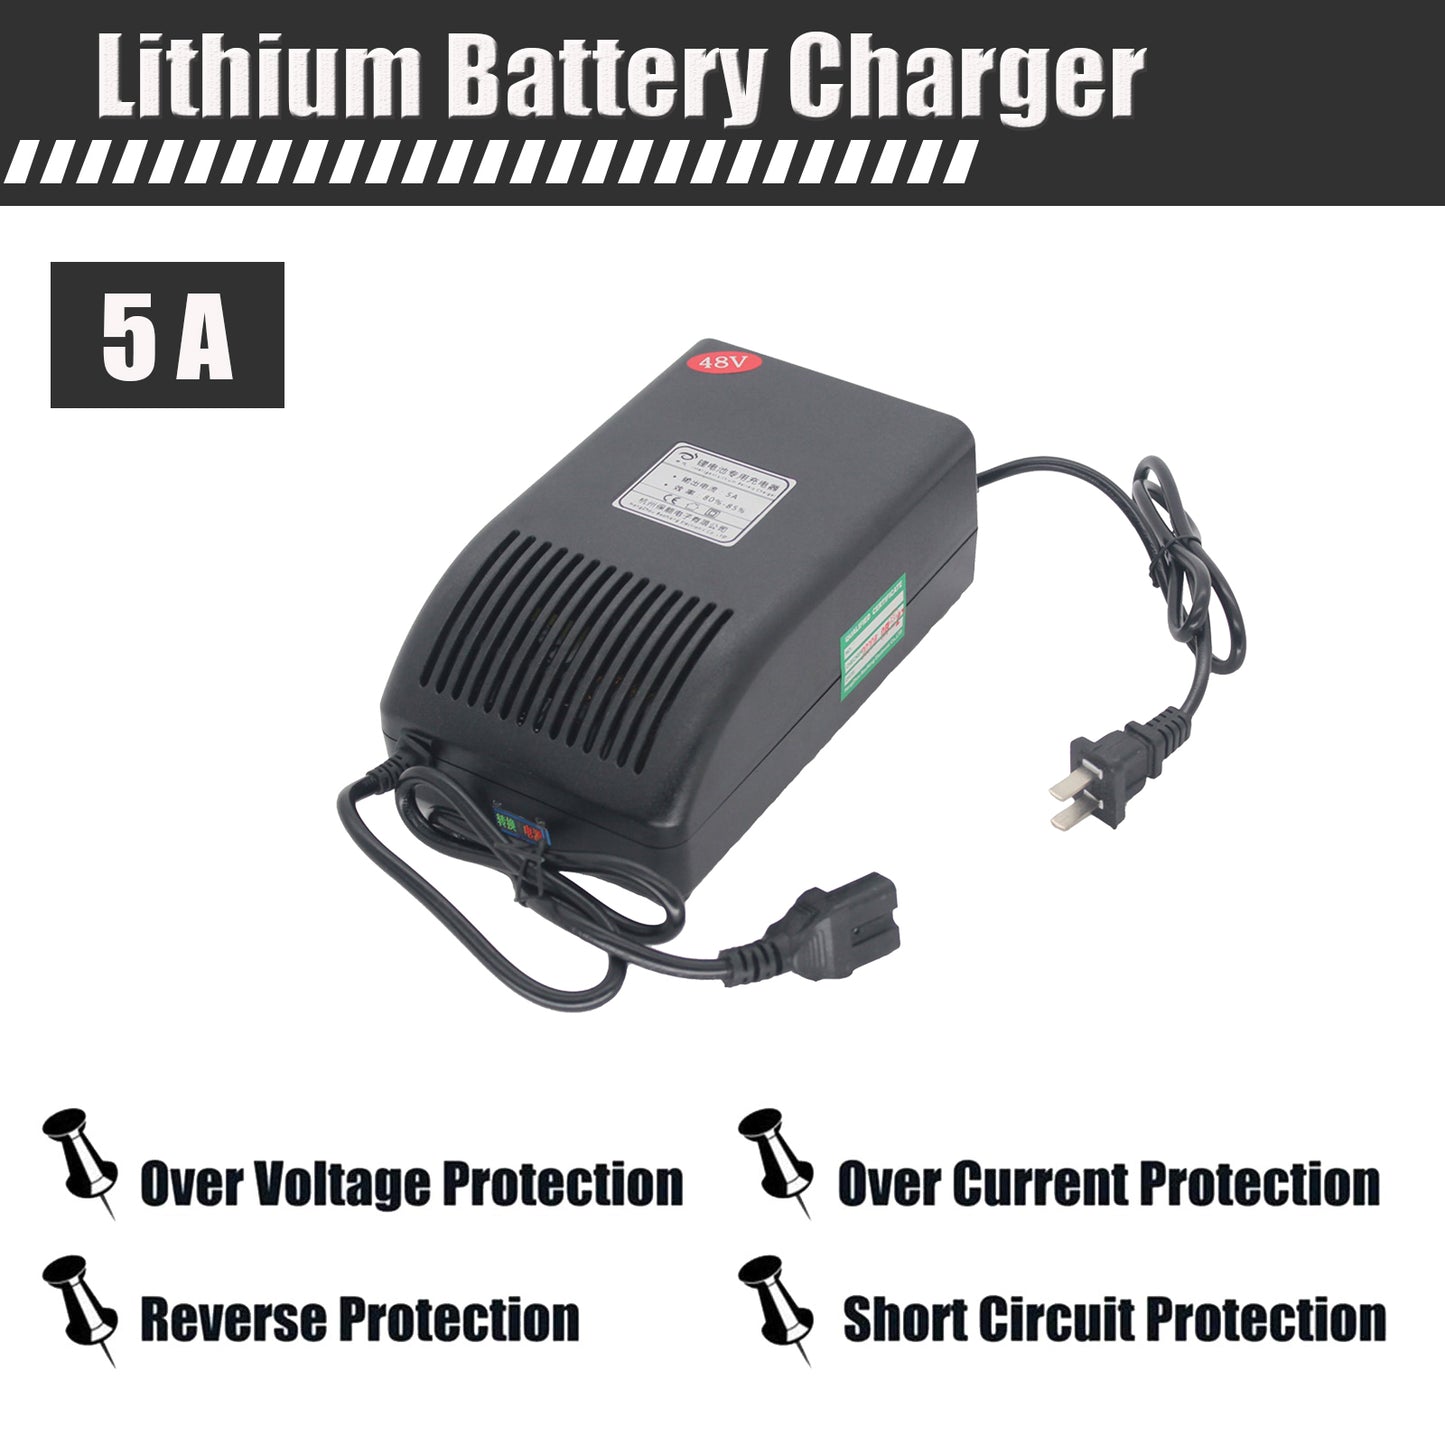 BtrPower Ebike Battery 48V 50AH Li-ion Battery Pack with 5A Charger, 50A BMS